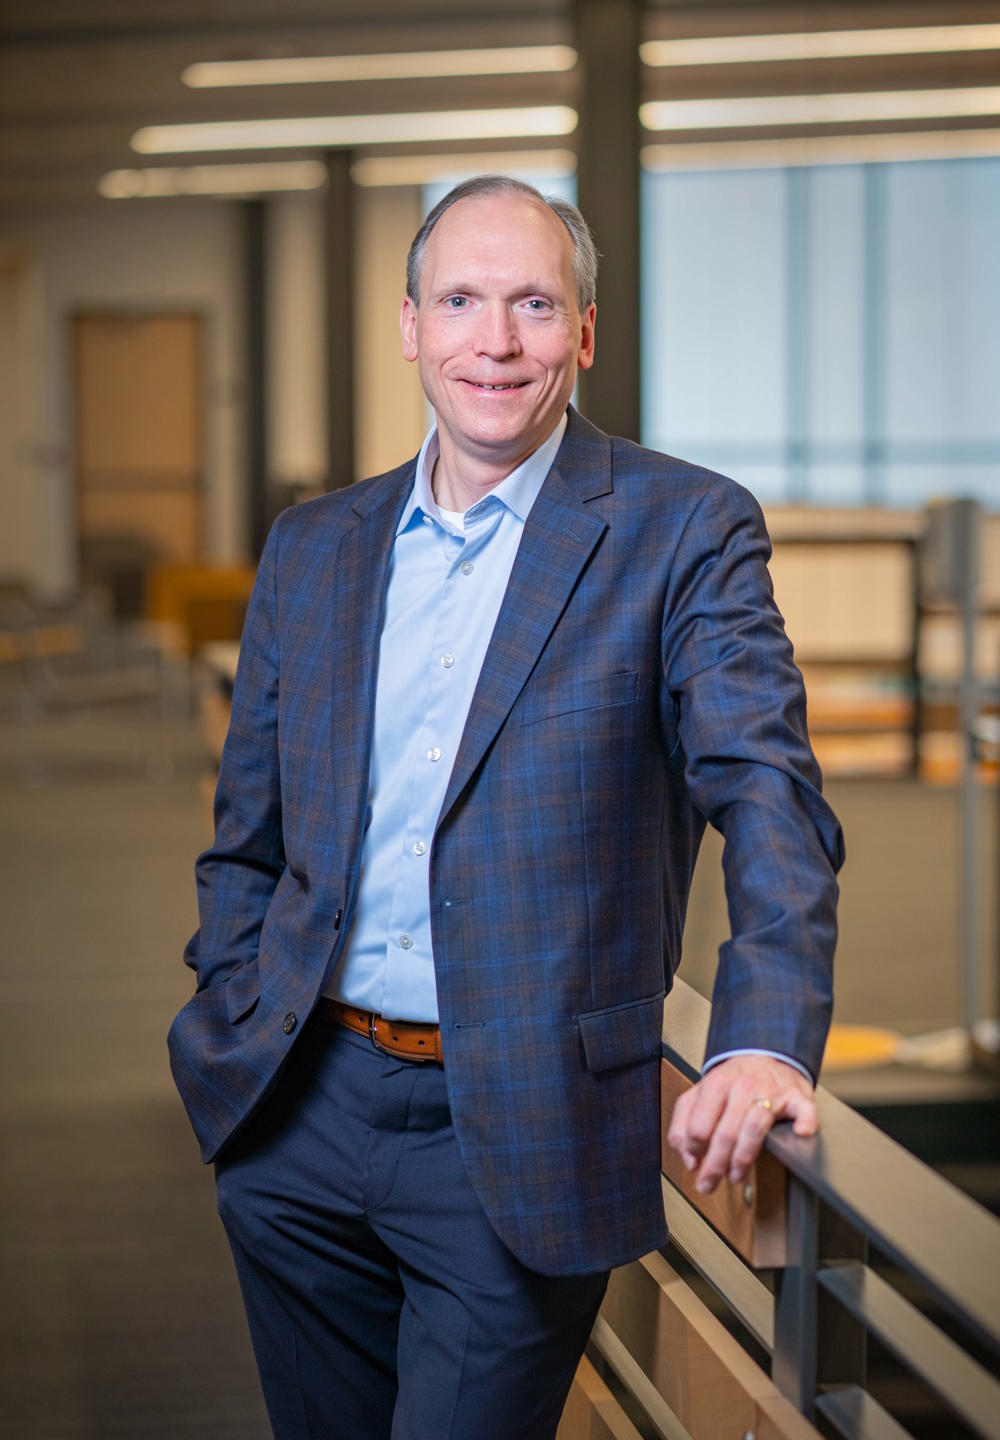 Portrait of Brian Valentine, CFO and Executive Vice President of The Andersons